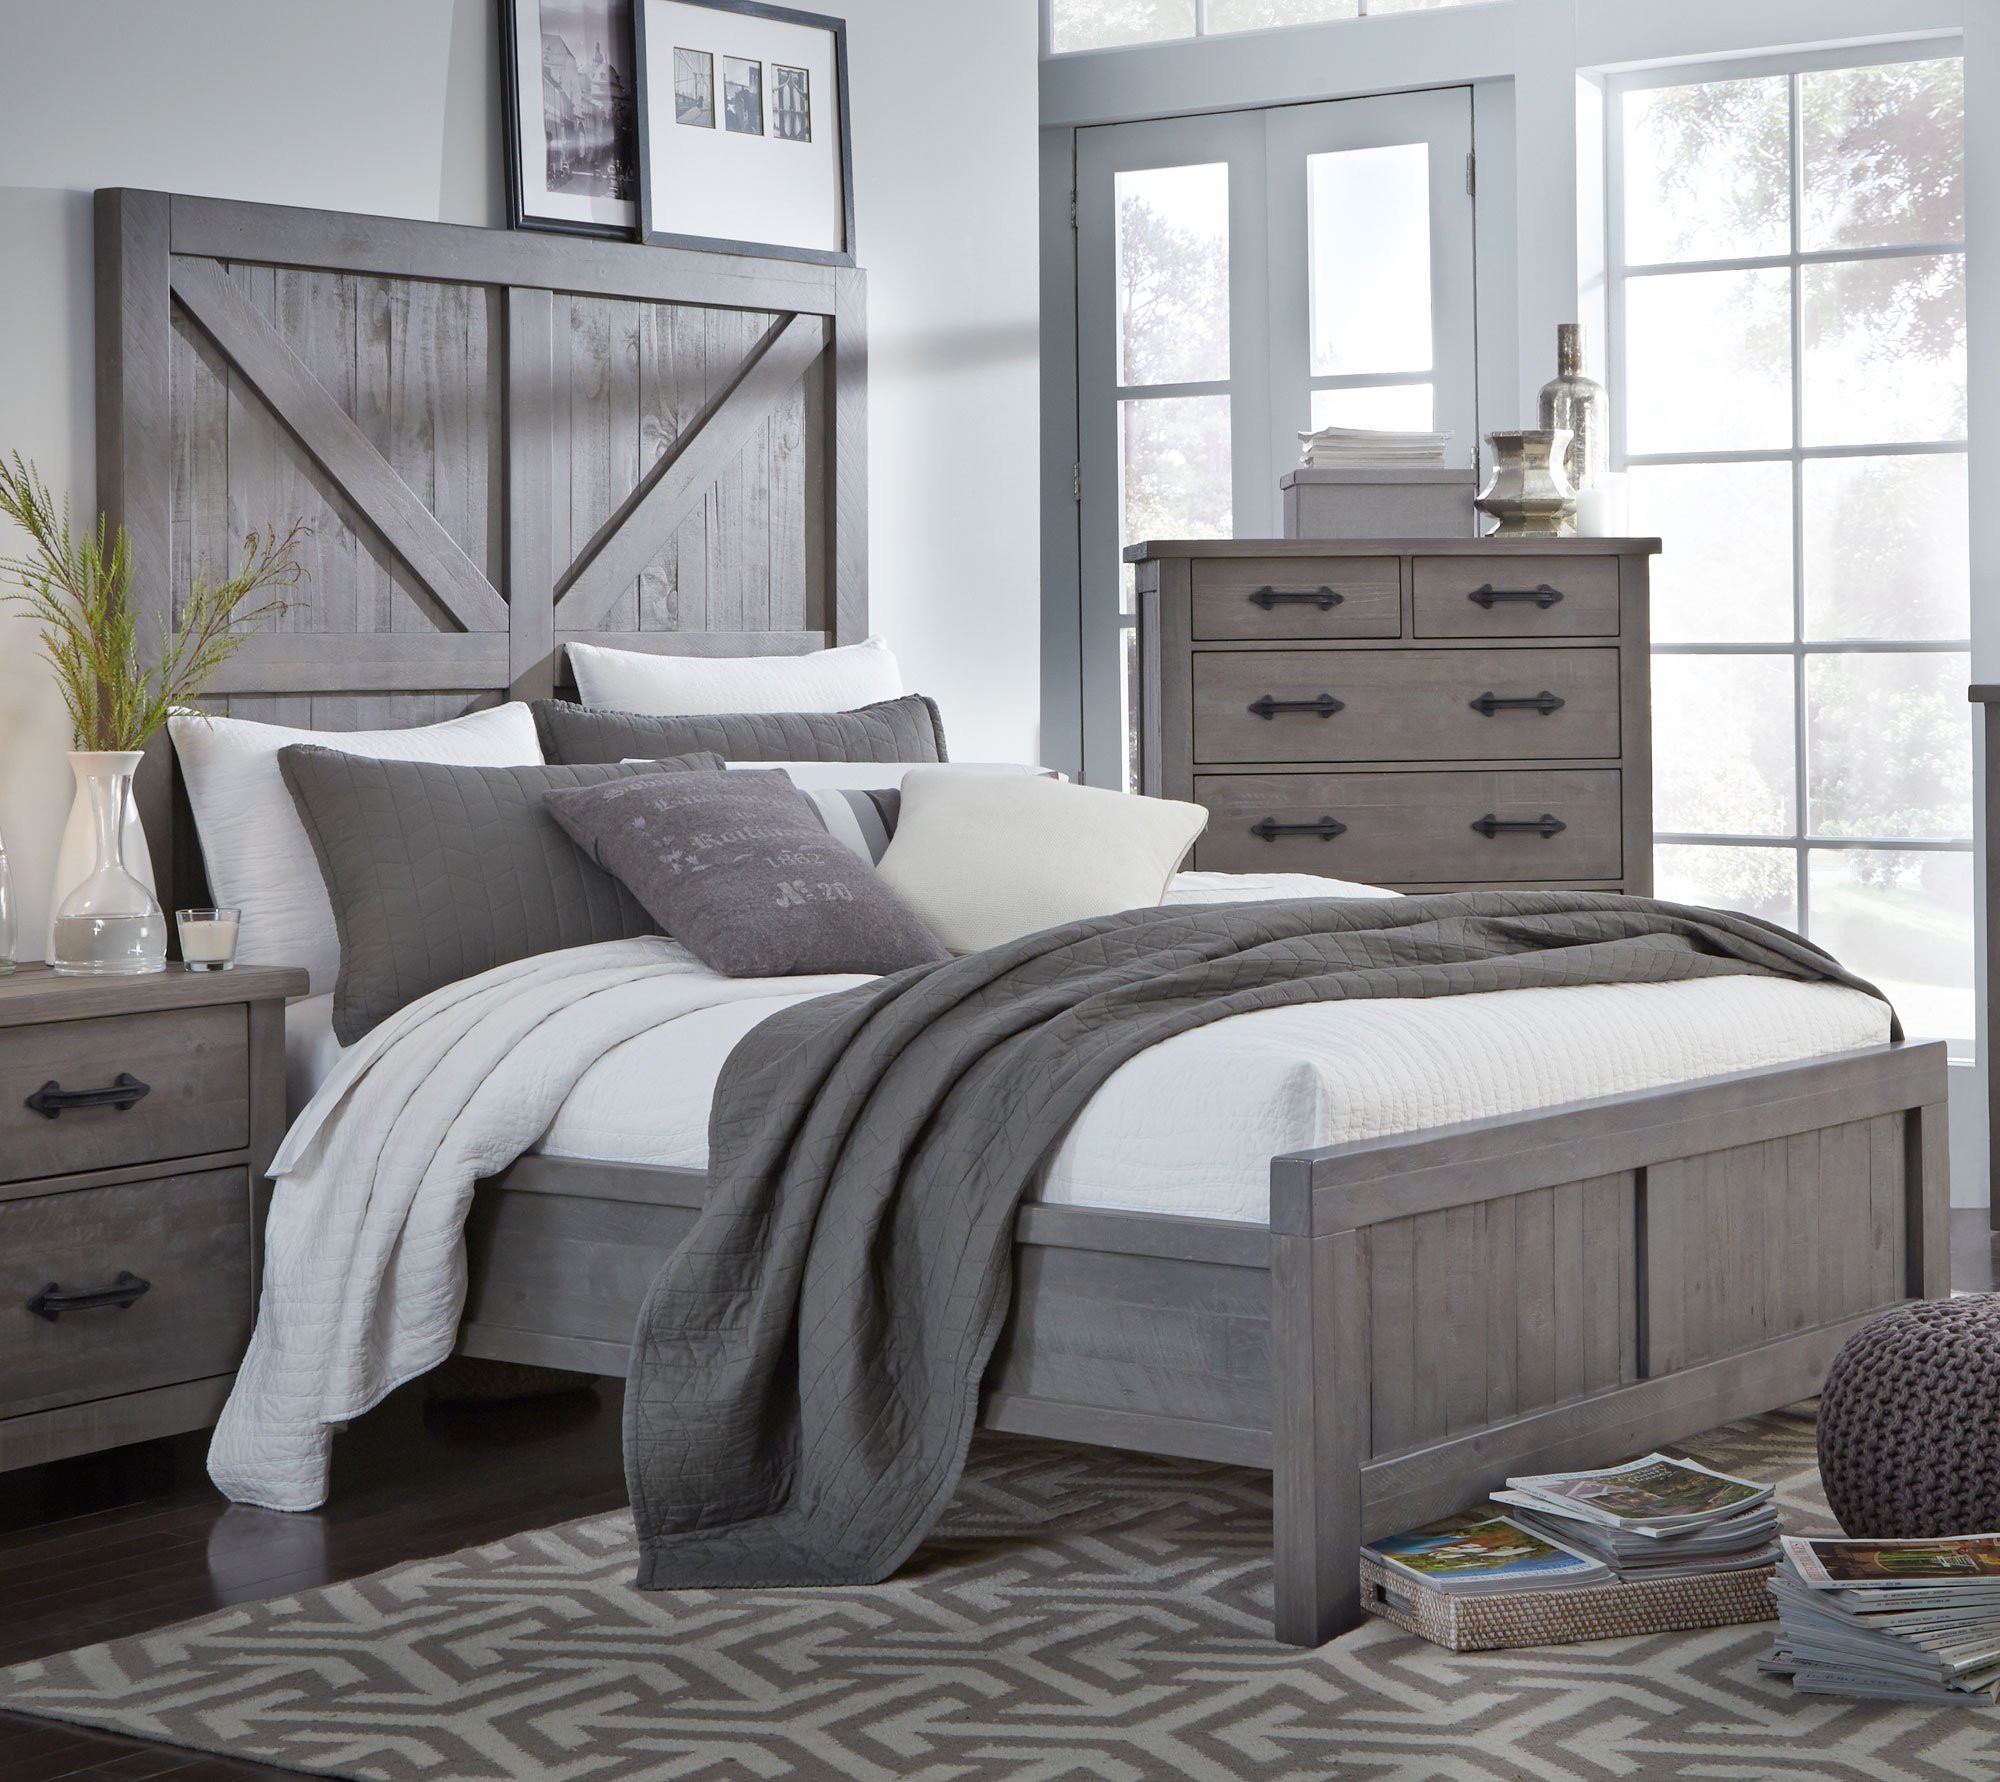 Rustic King Size Bedroom Sets
 Gray Rustic Contemporary 6 Piece King Bedroom Set Austin